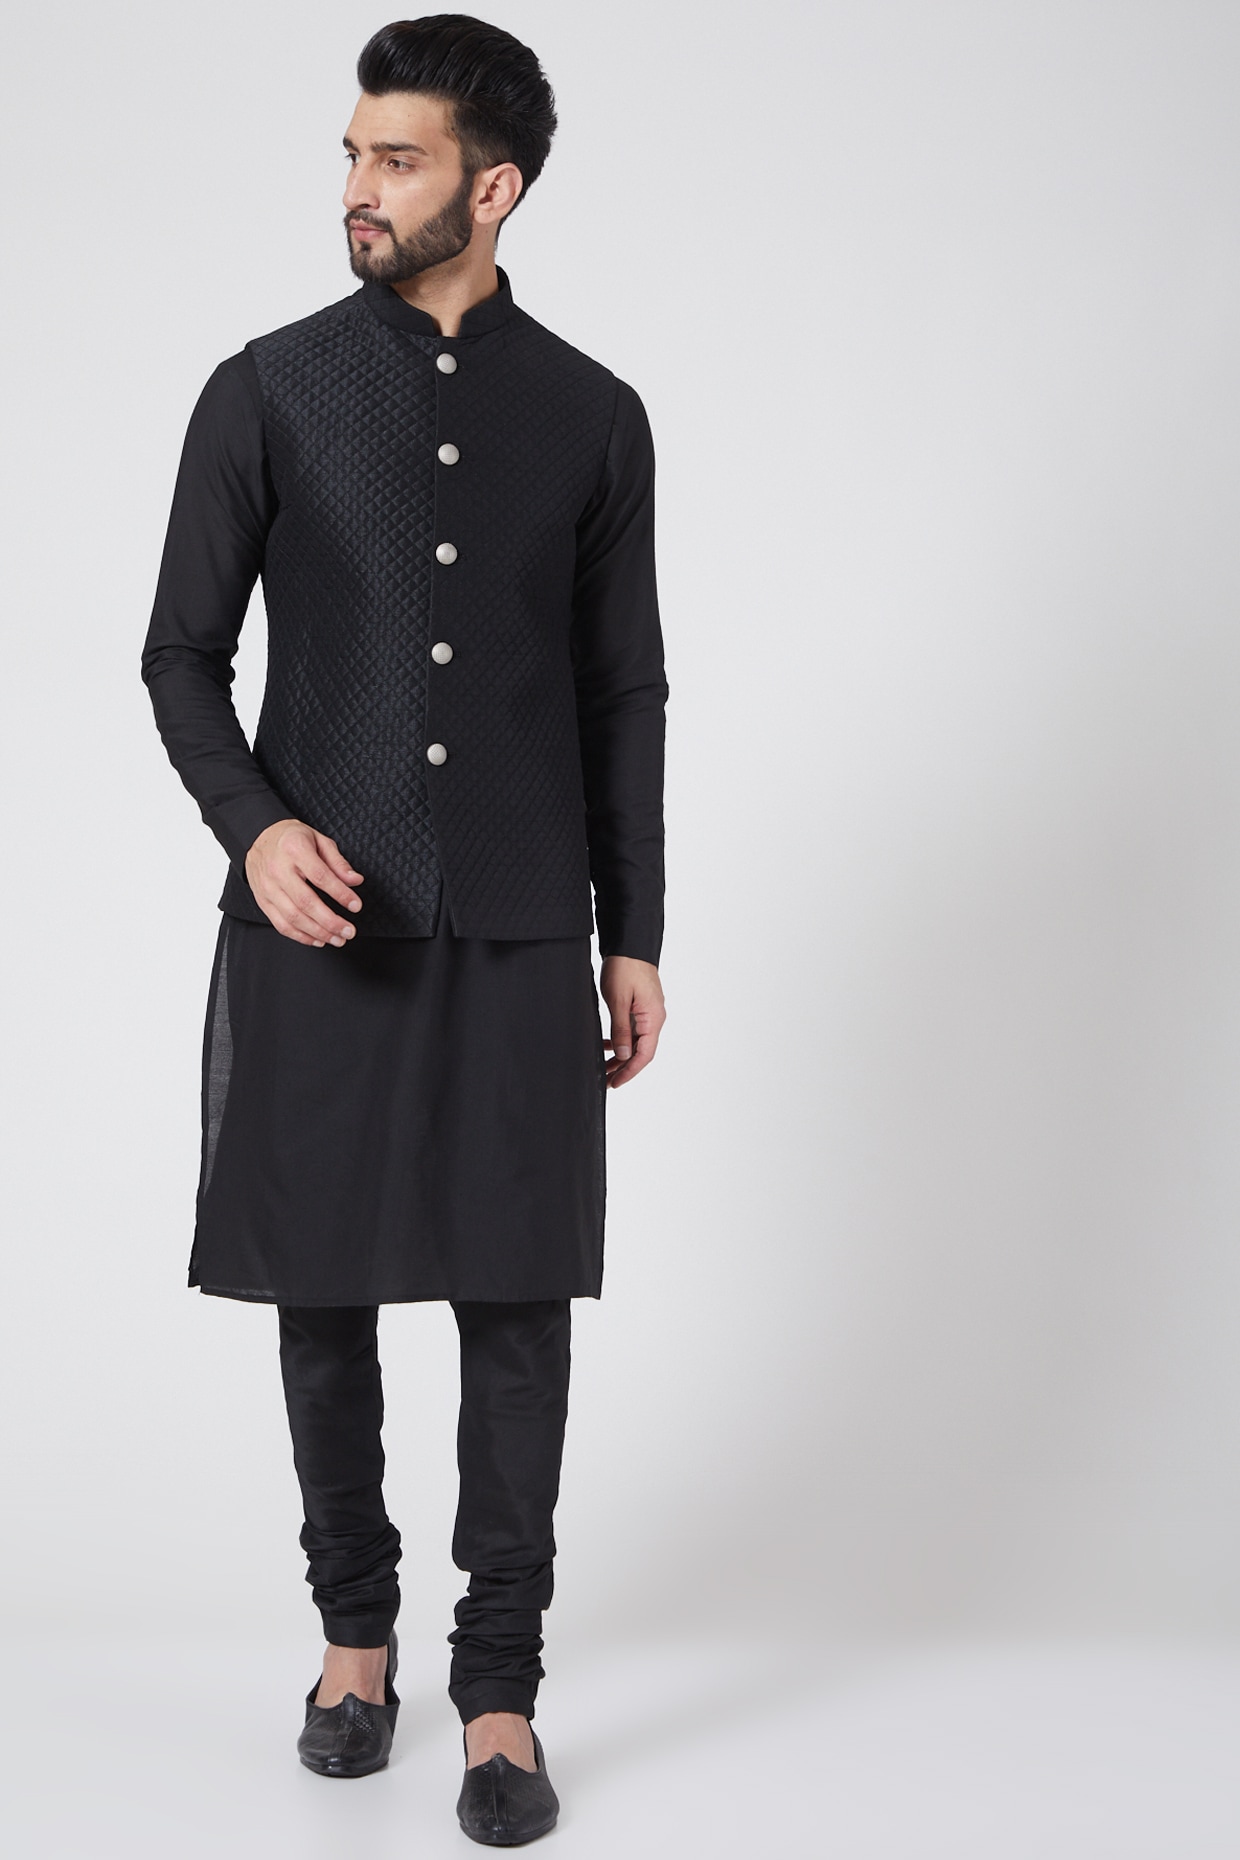 Buy Black Kurta And Front Open Jacket with Thread Work